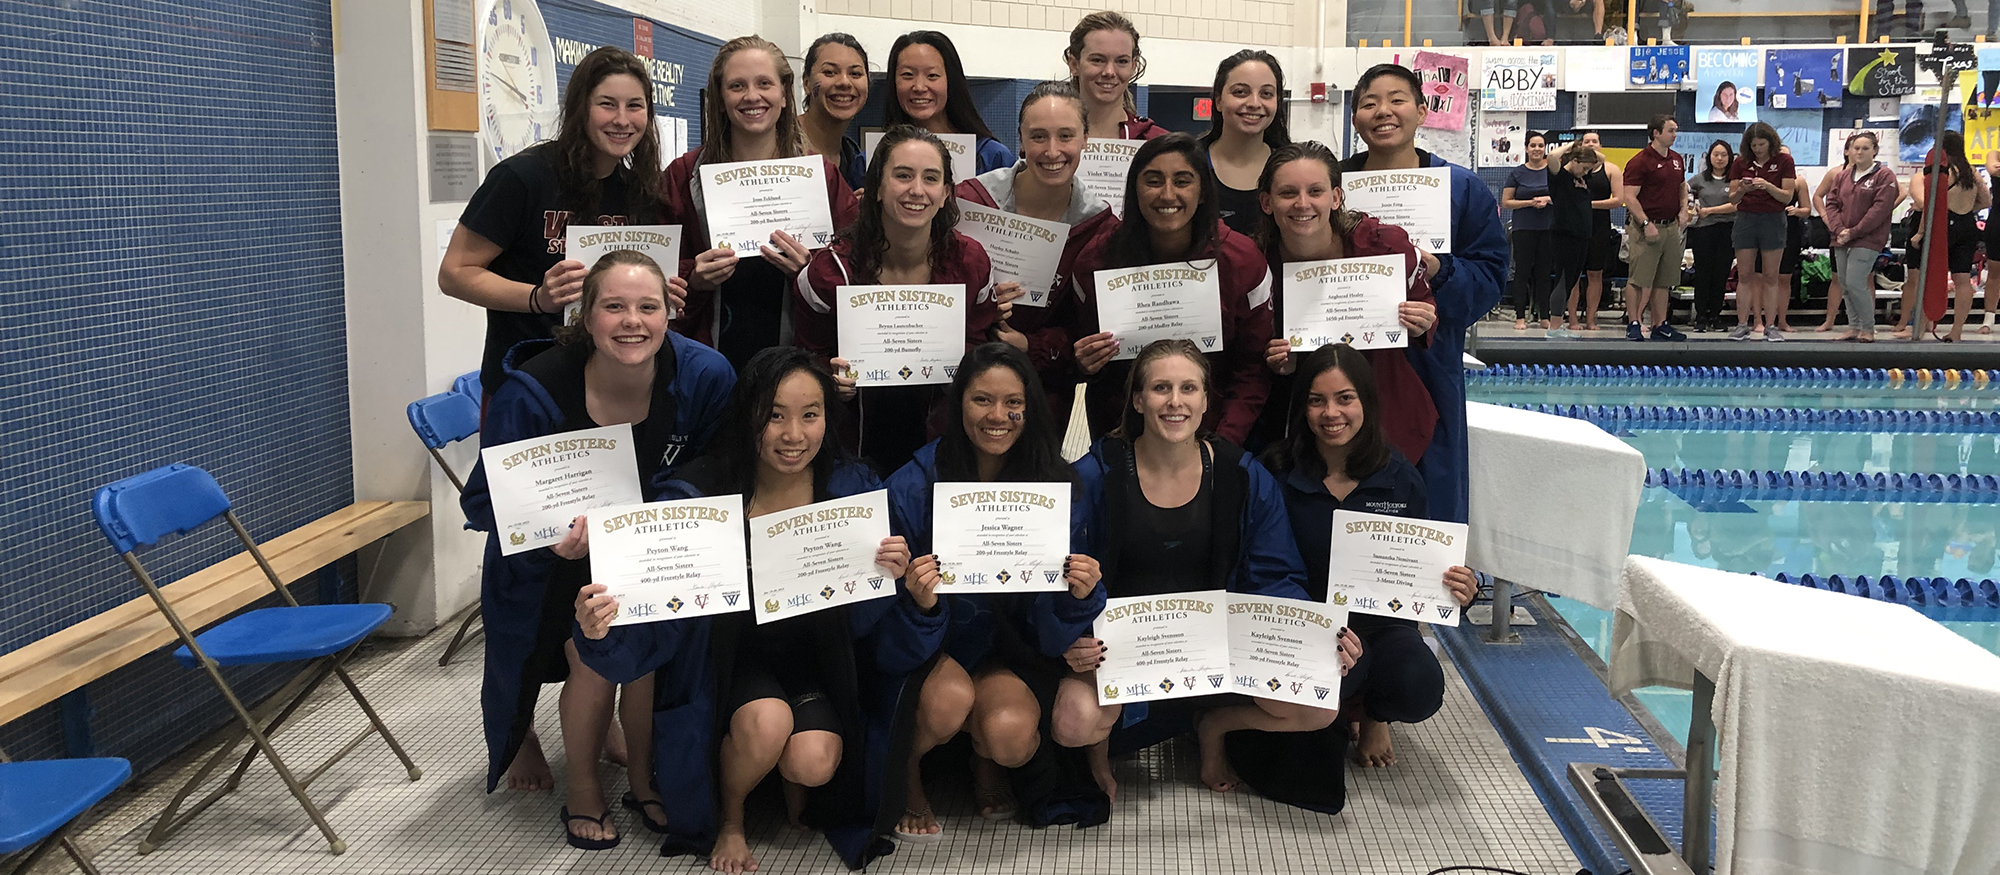 Mount Holyoke junior diver Samantha Nemivant is pictured with all the other Seven Sisters Champions from the 2019 meet. She is in the front row on the far right.